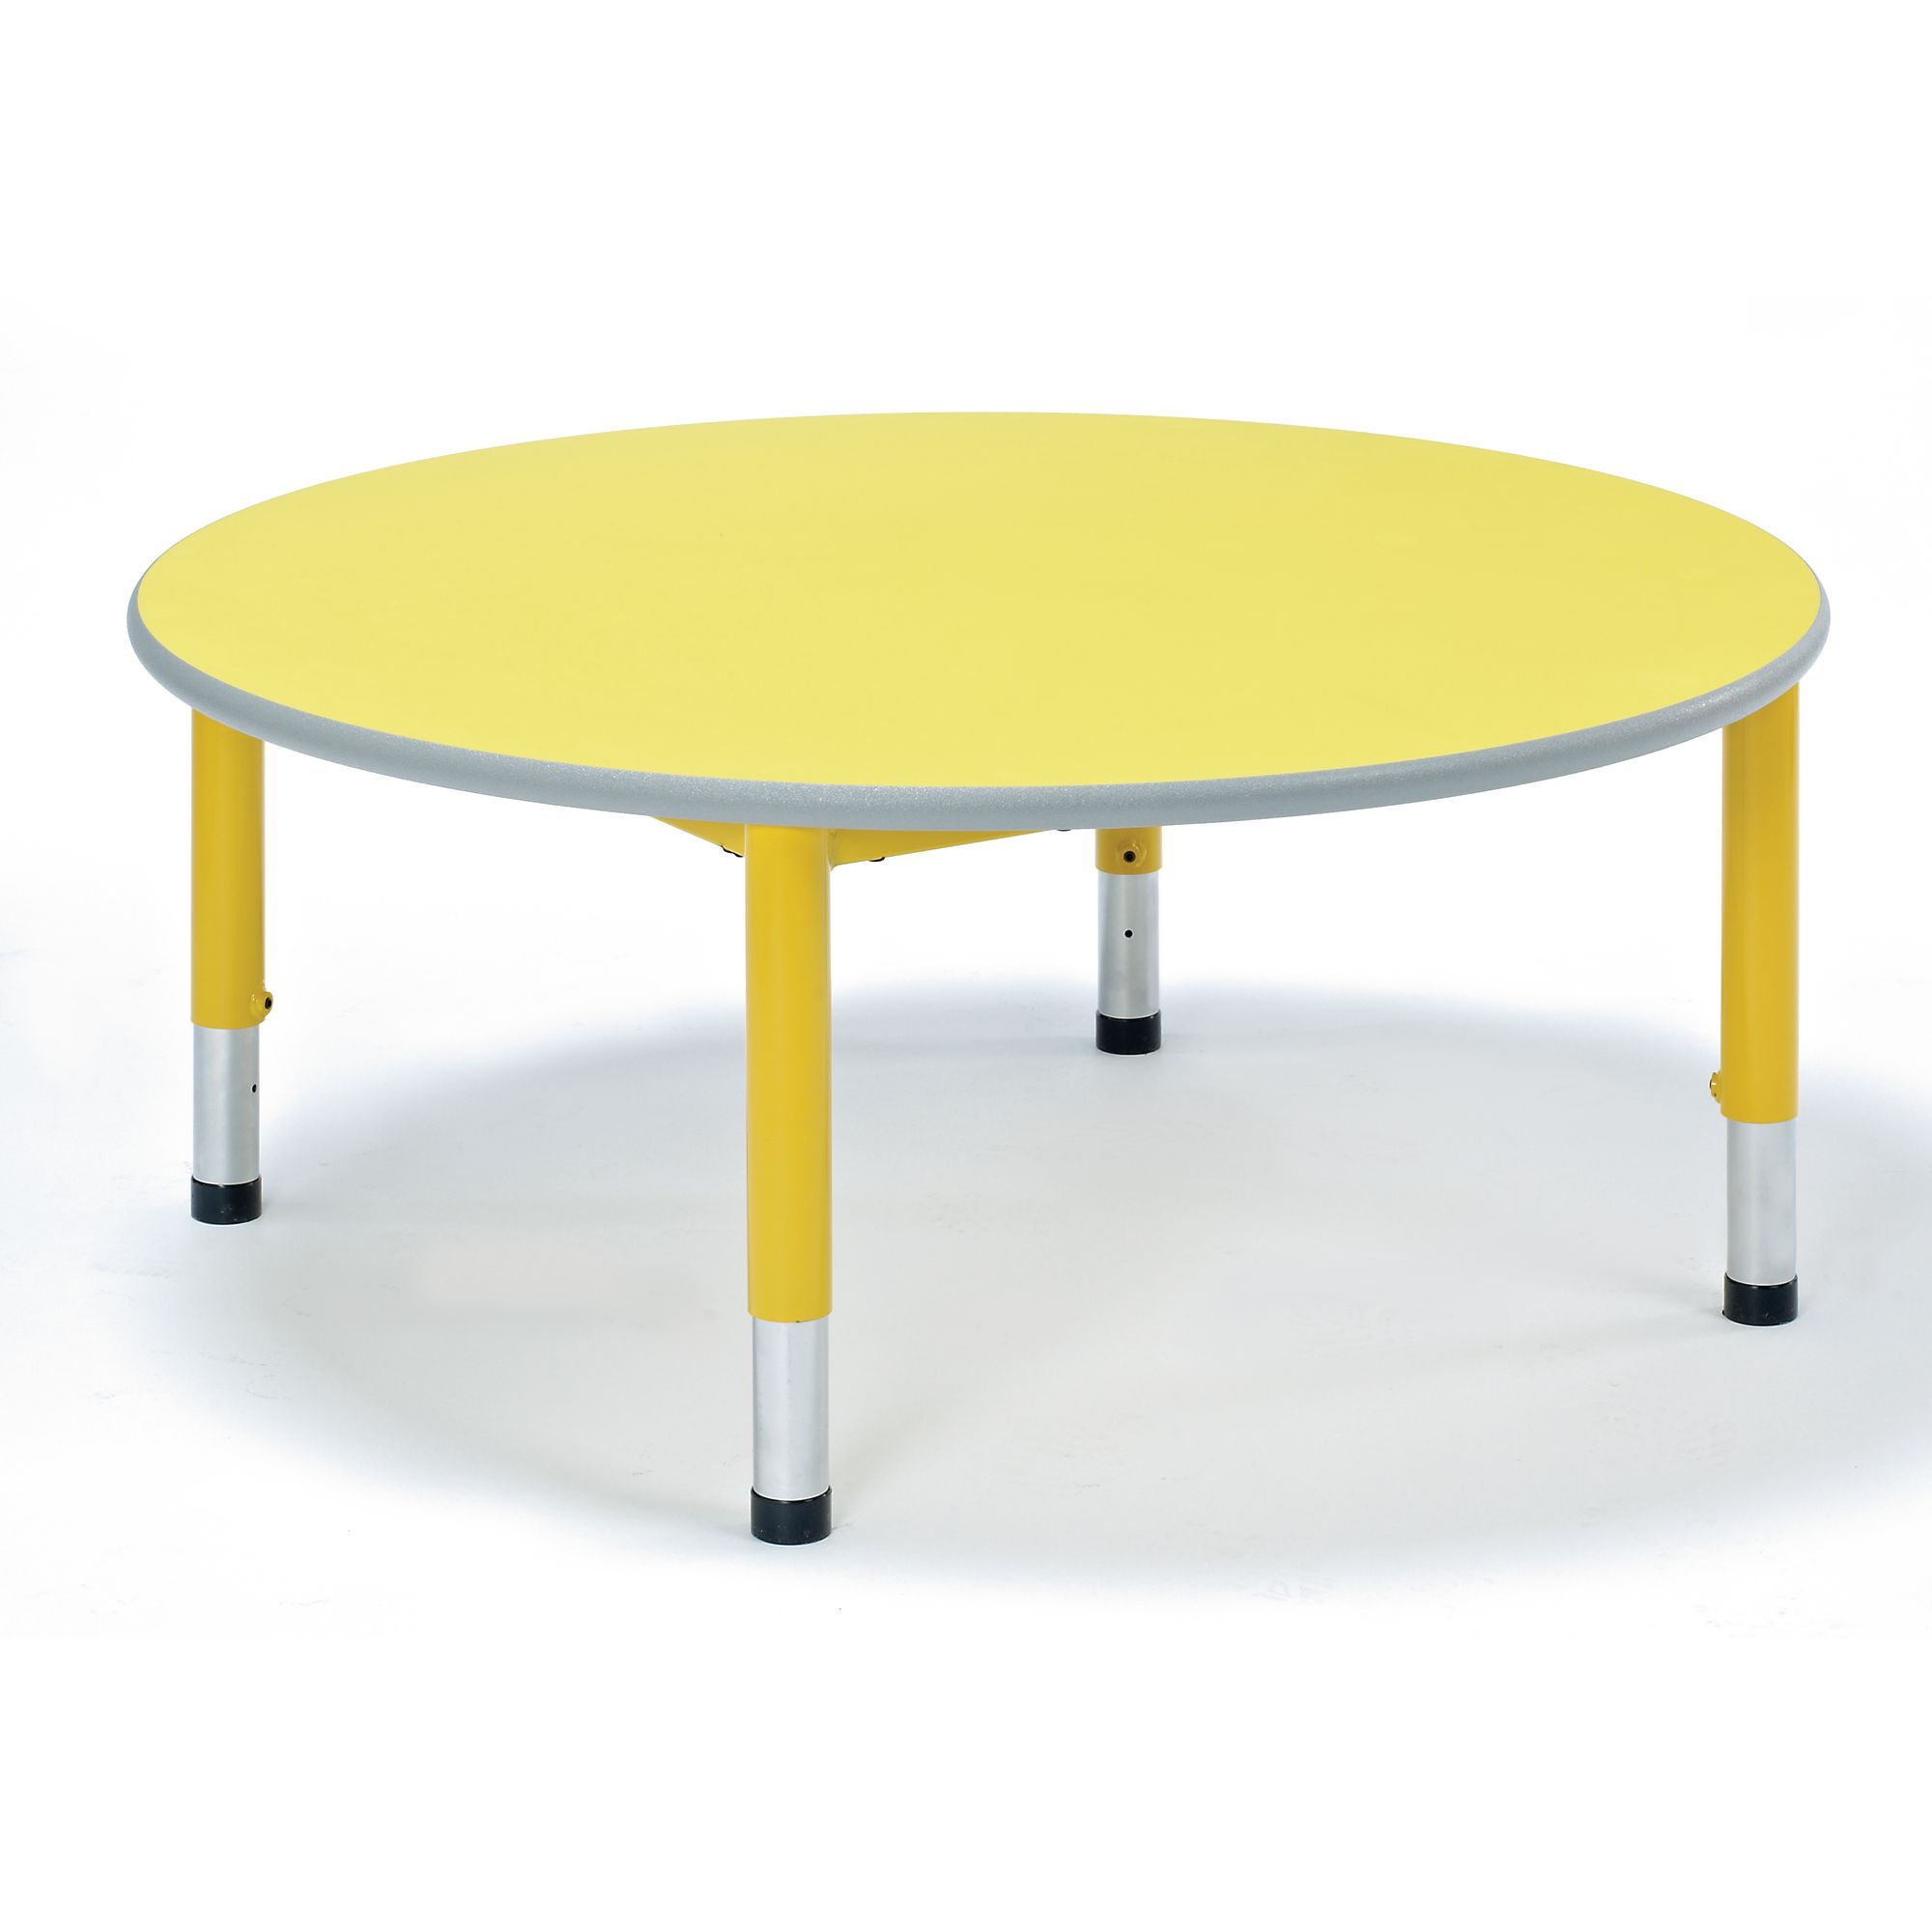 Harlequin Circular Height Adjustable Steel Classroom Table - 1050 x 400 to 640mm - Soft Blue